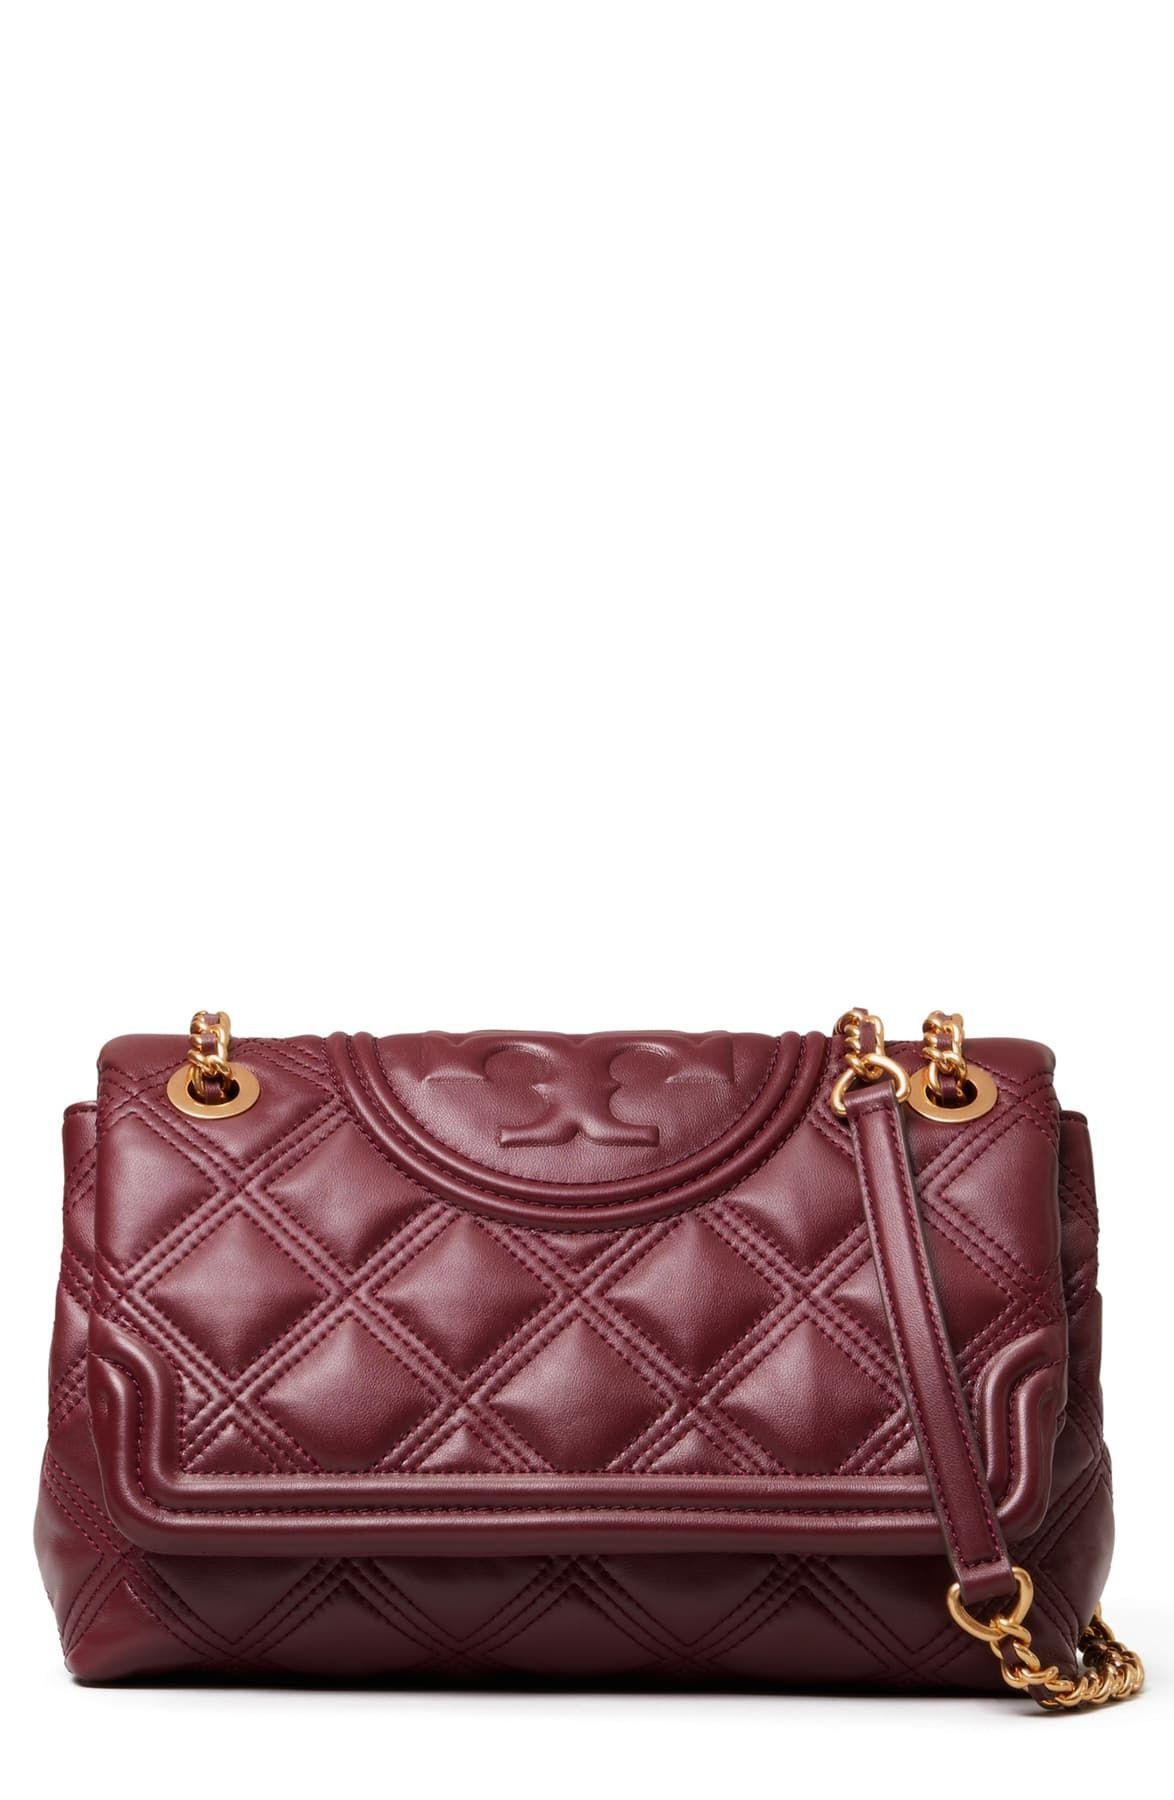 Tory Burch Fleming Soft Metallic Quilted Small Shoulder Bag